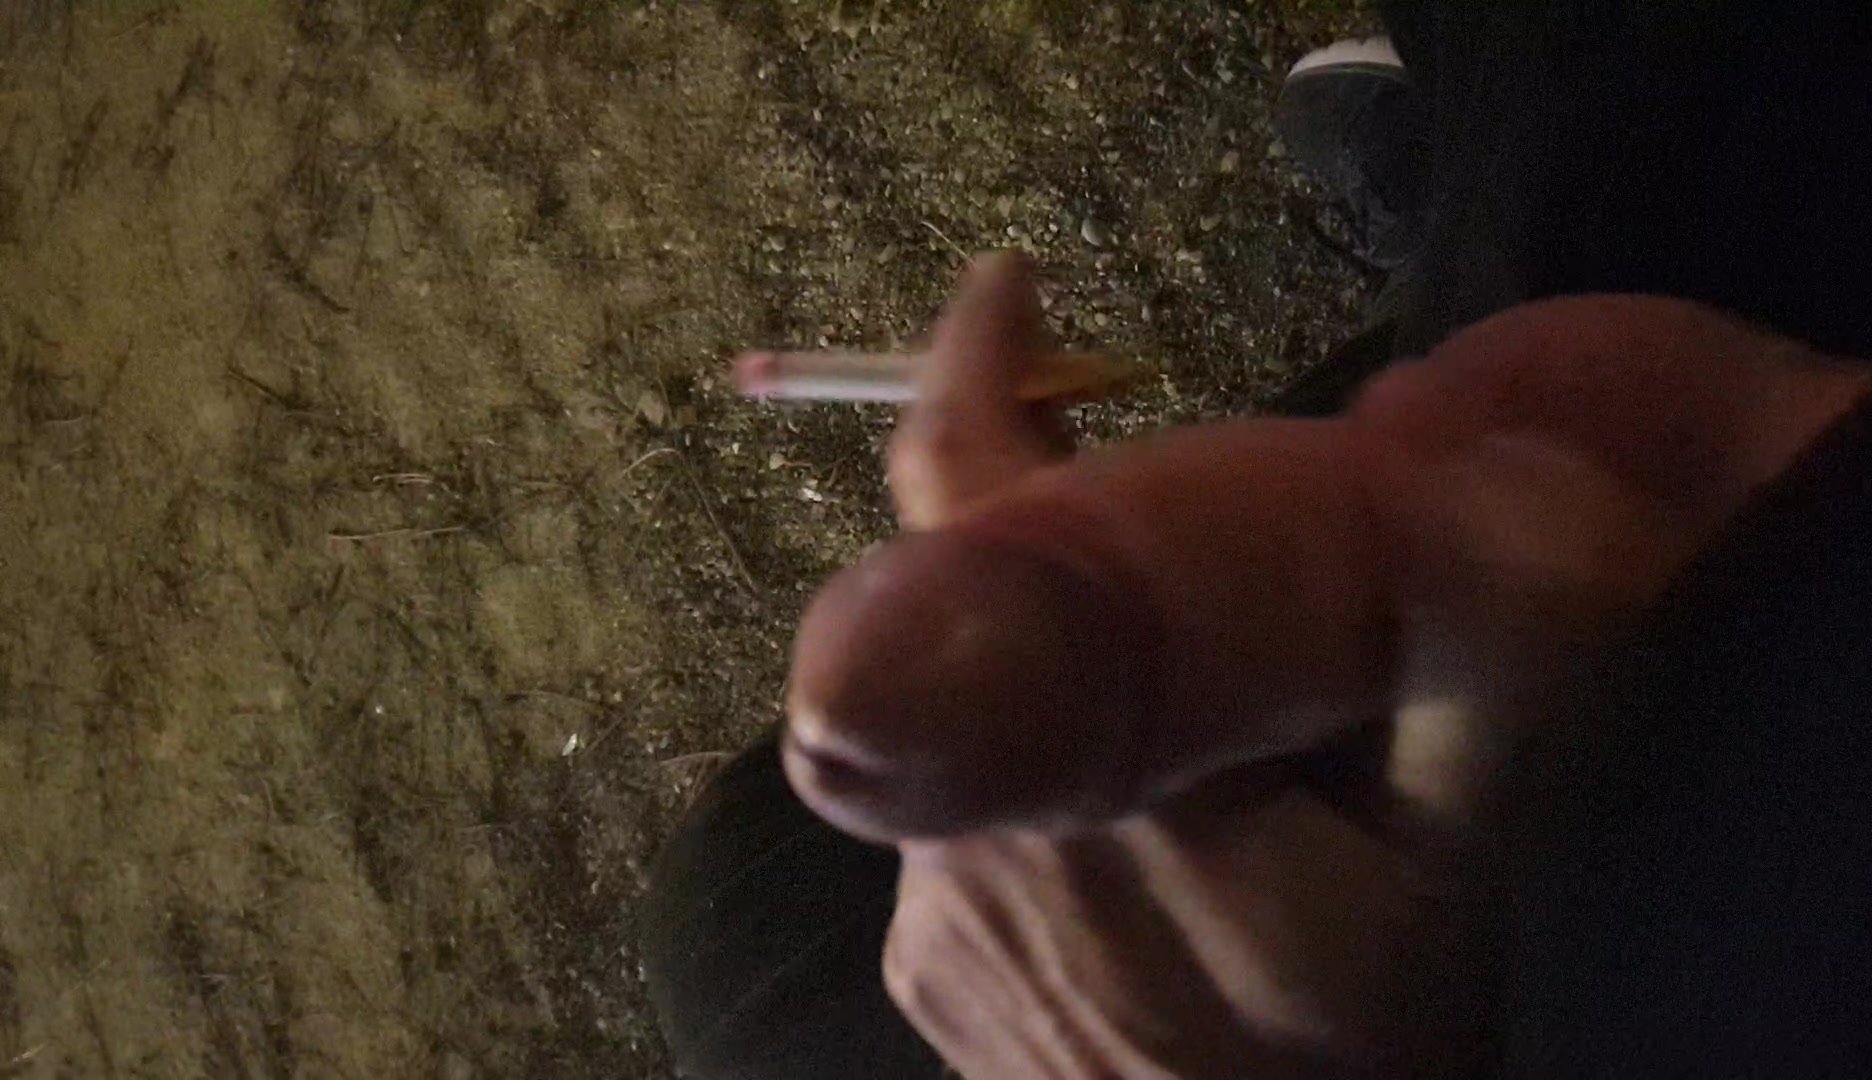 Jerking in public while smoking a cig